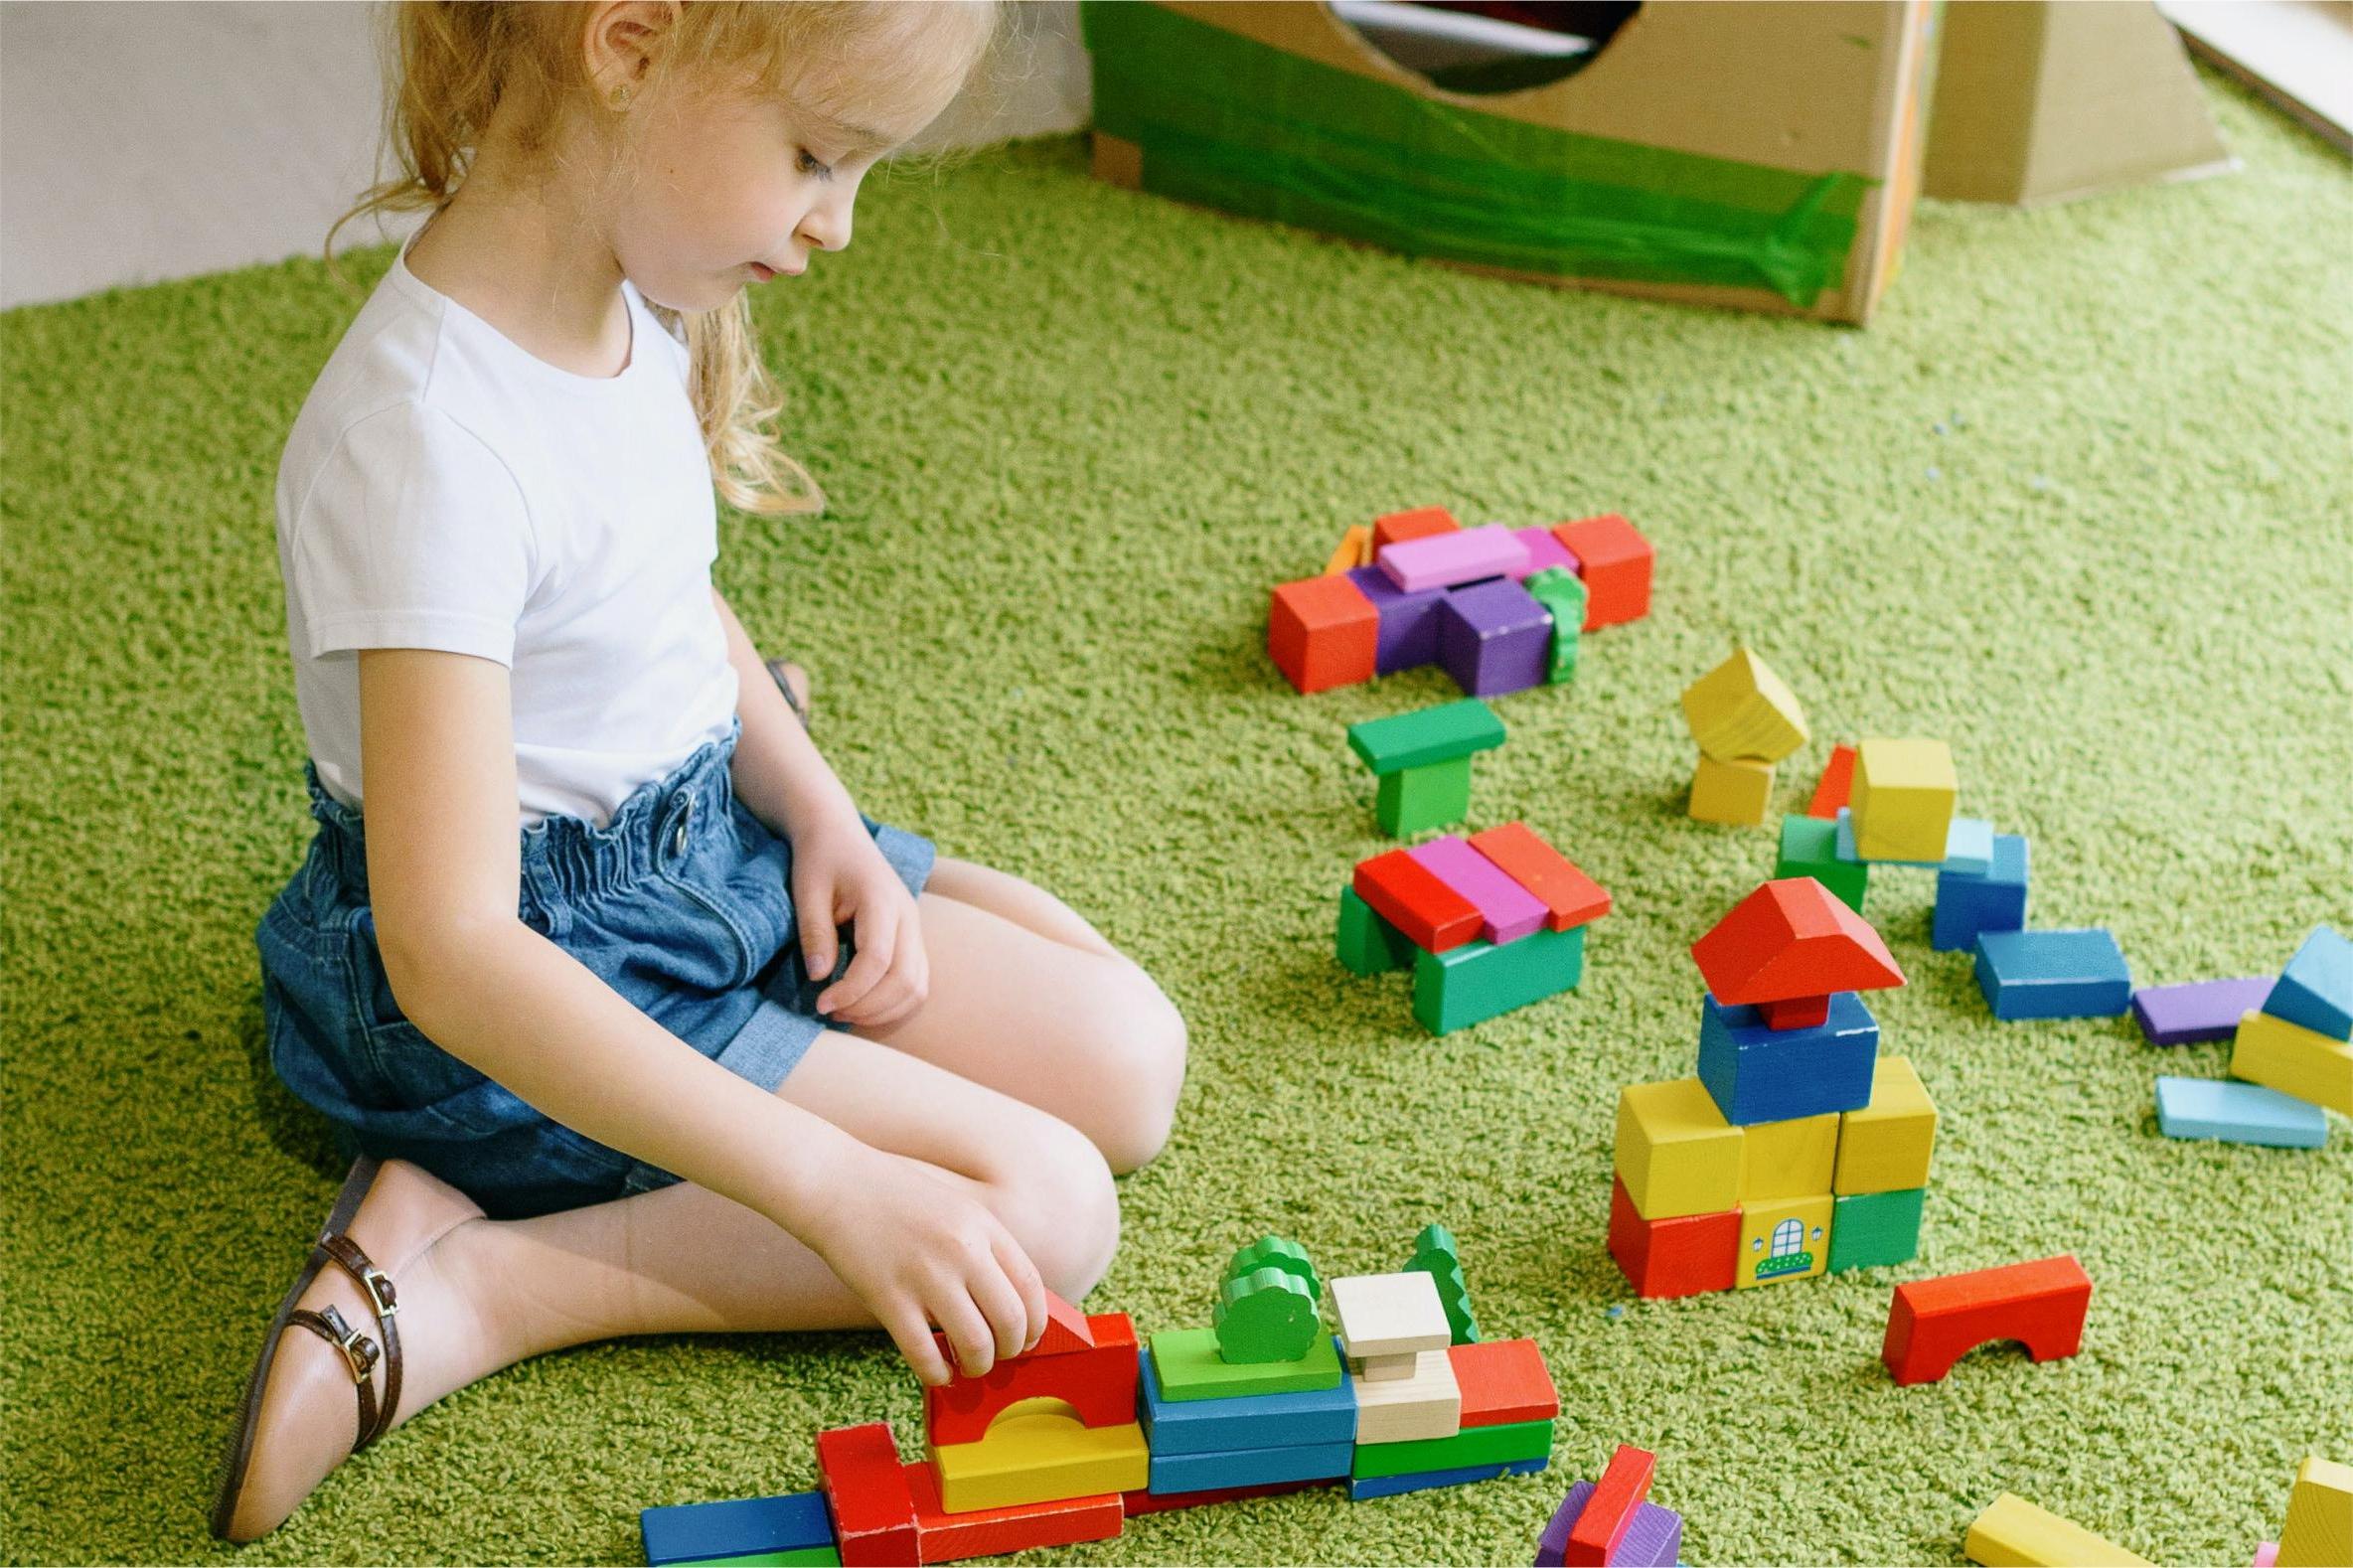 Puzzle&Blocks Are Suitable For Children Of What Age To Start Playing